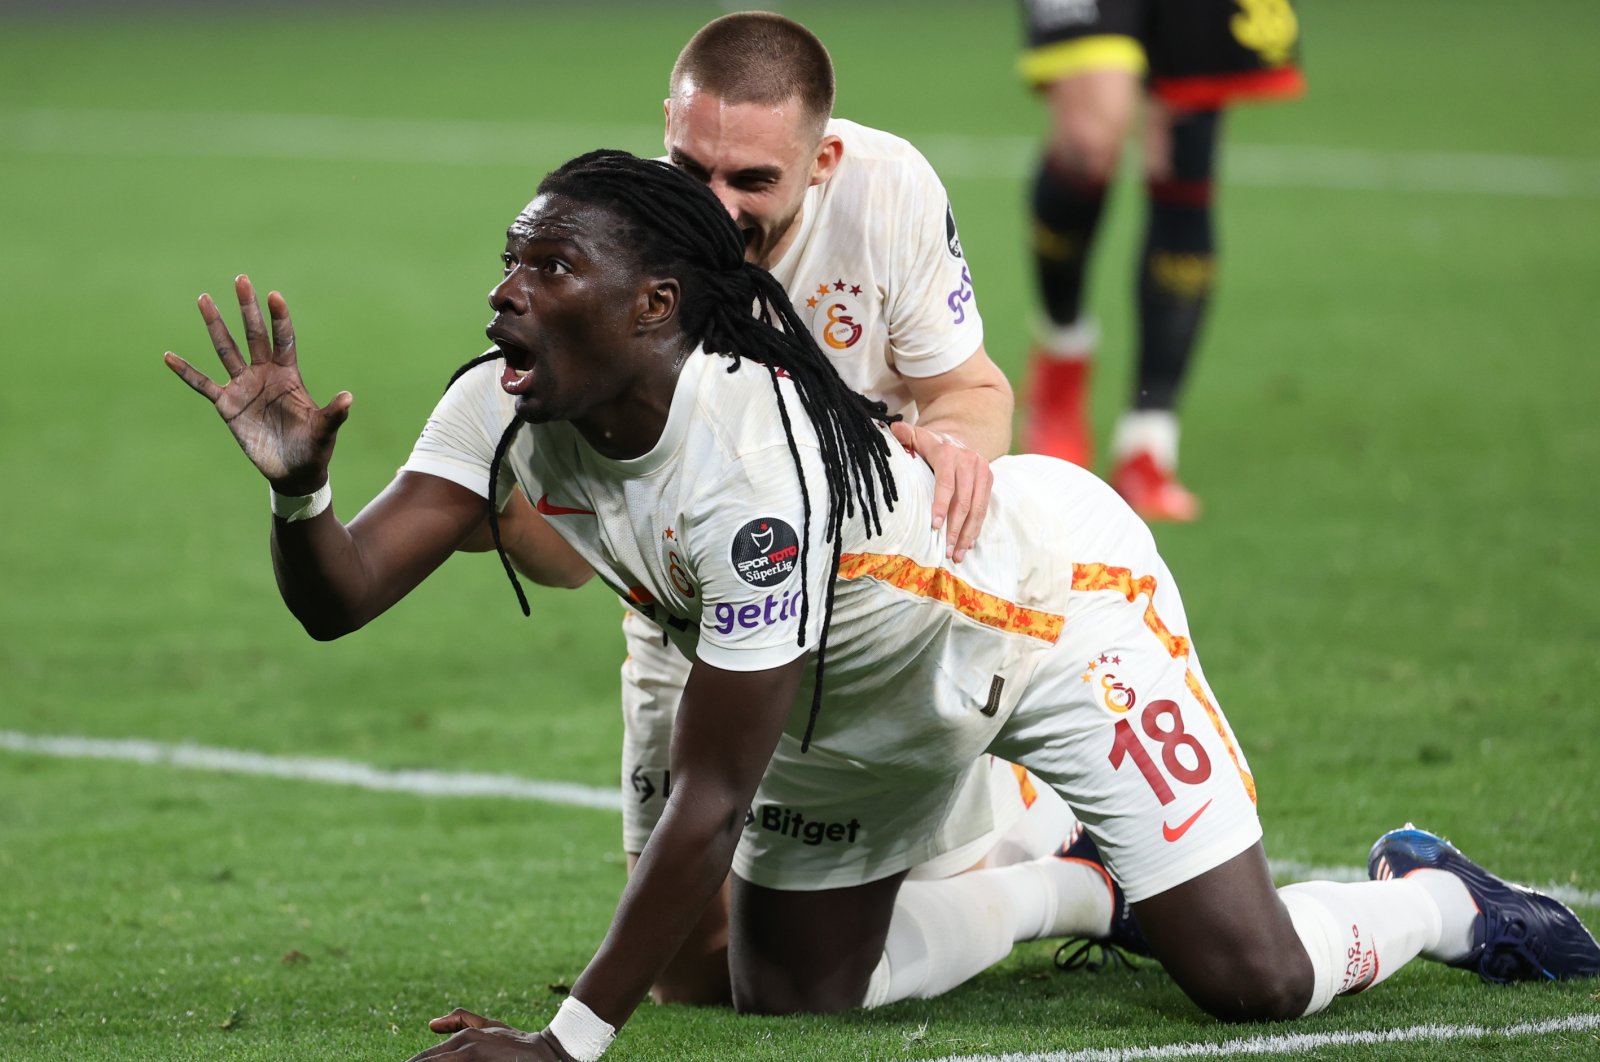 Galatasaray&#039;s Bafetimbi Gomis celebrates the third goal with his signature lion claw move at the Gürsel Aksel Stadium in Izmir during the Turkish Süper Lig match against Göztepe, on Feb. 21, 2022 (AA Photo)